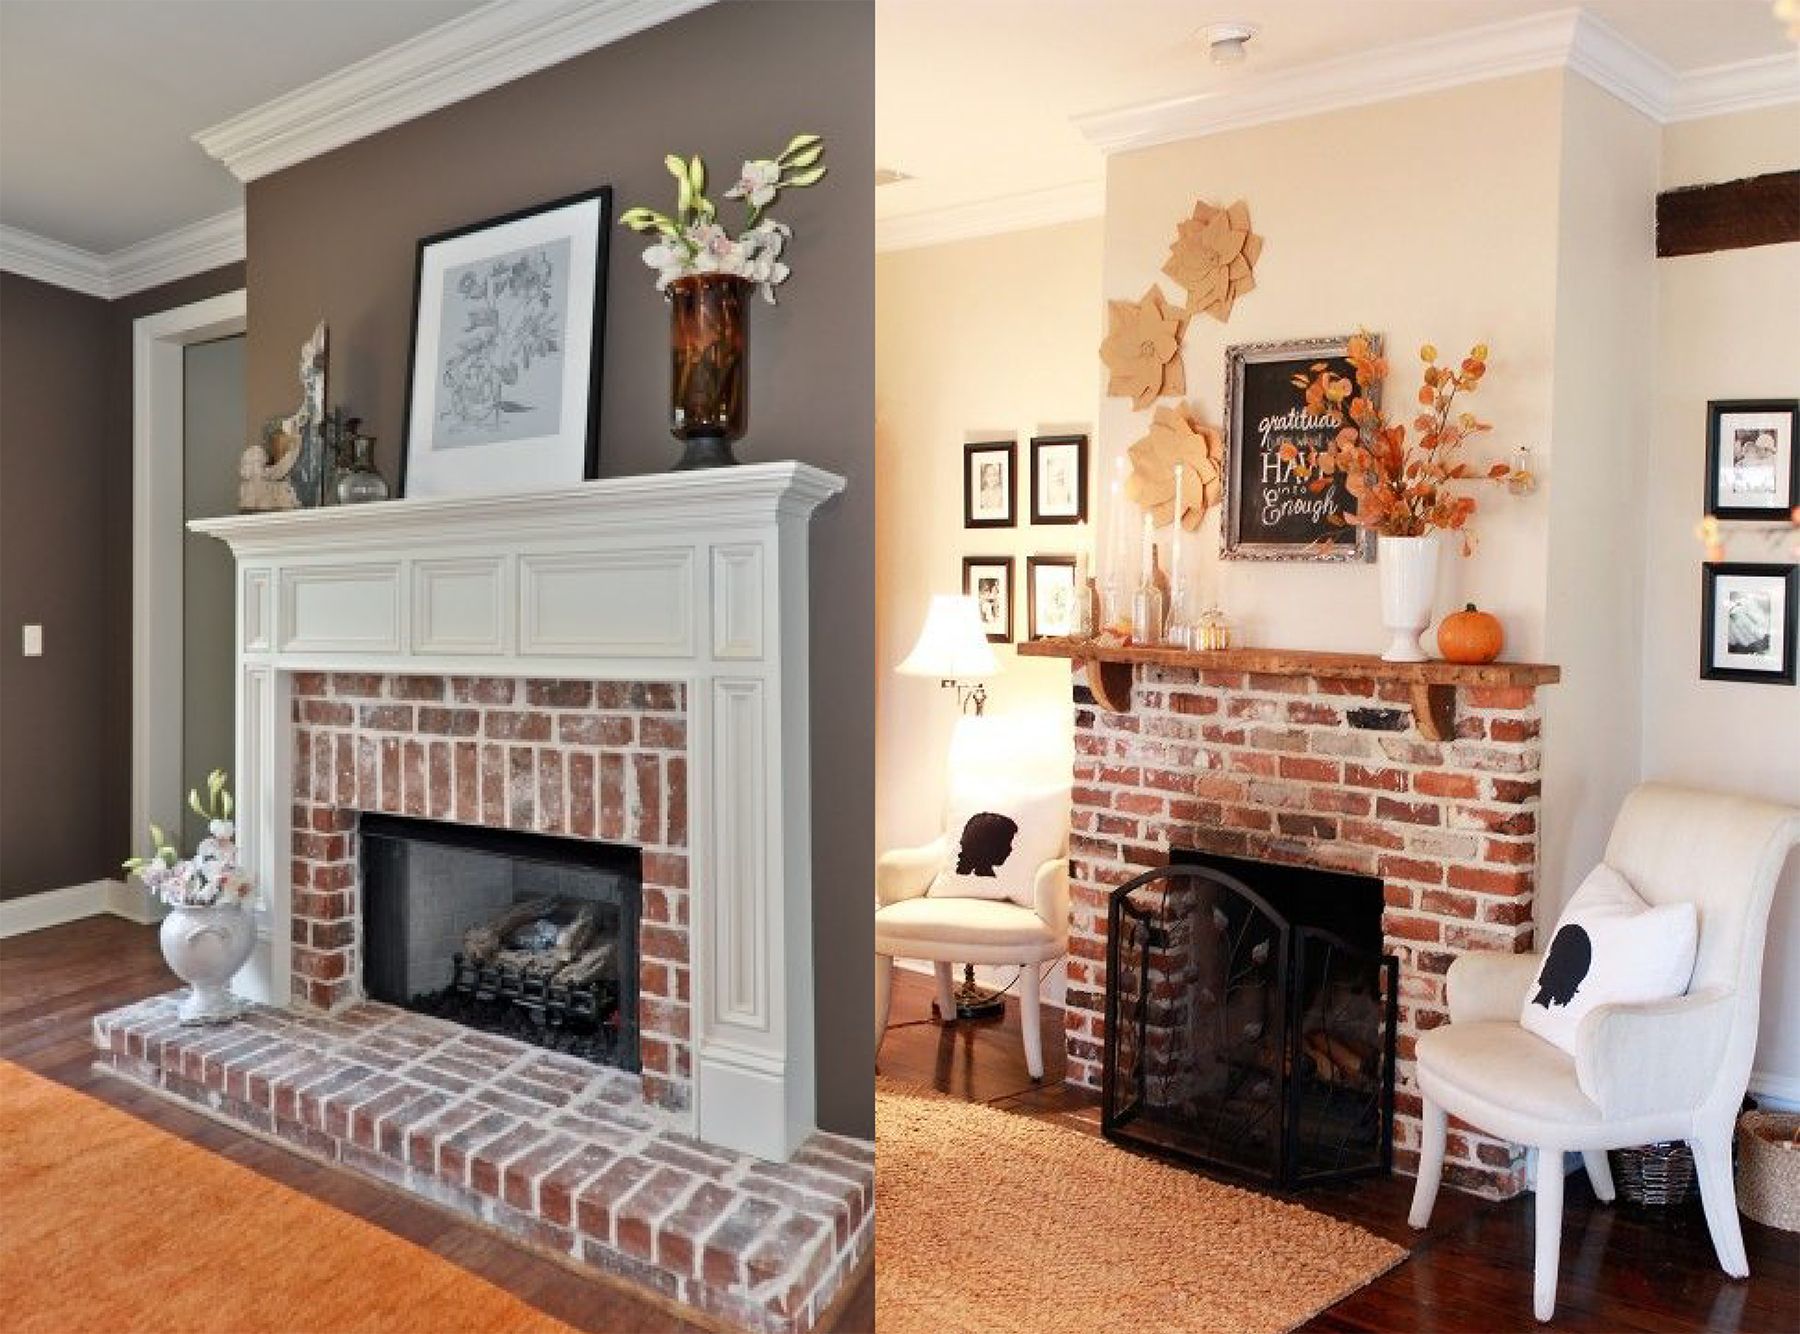 Pinterest Fireplace Decor Awesome Exposed Brick Fireplace Almond Home In 2019